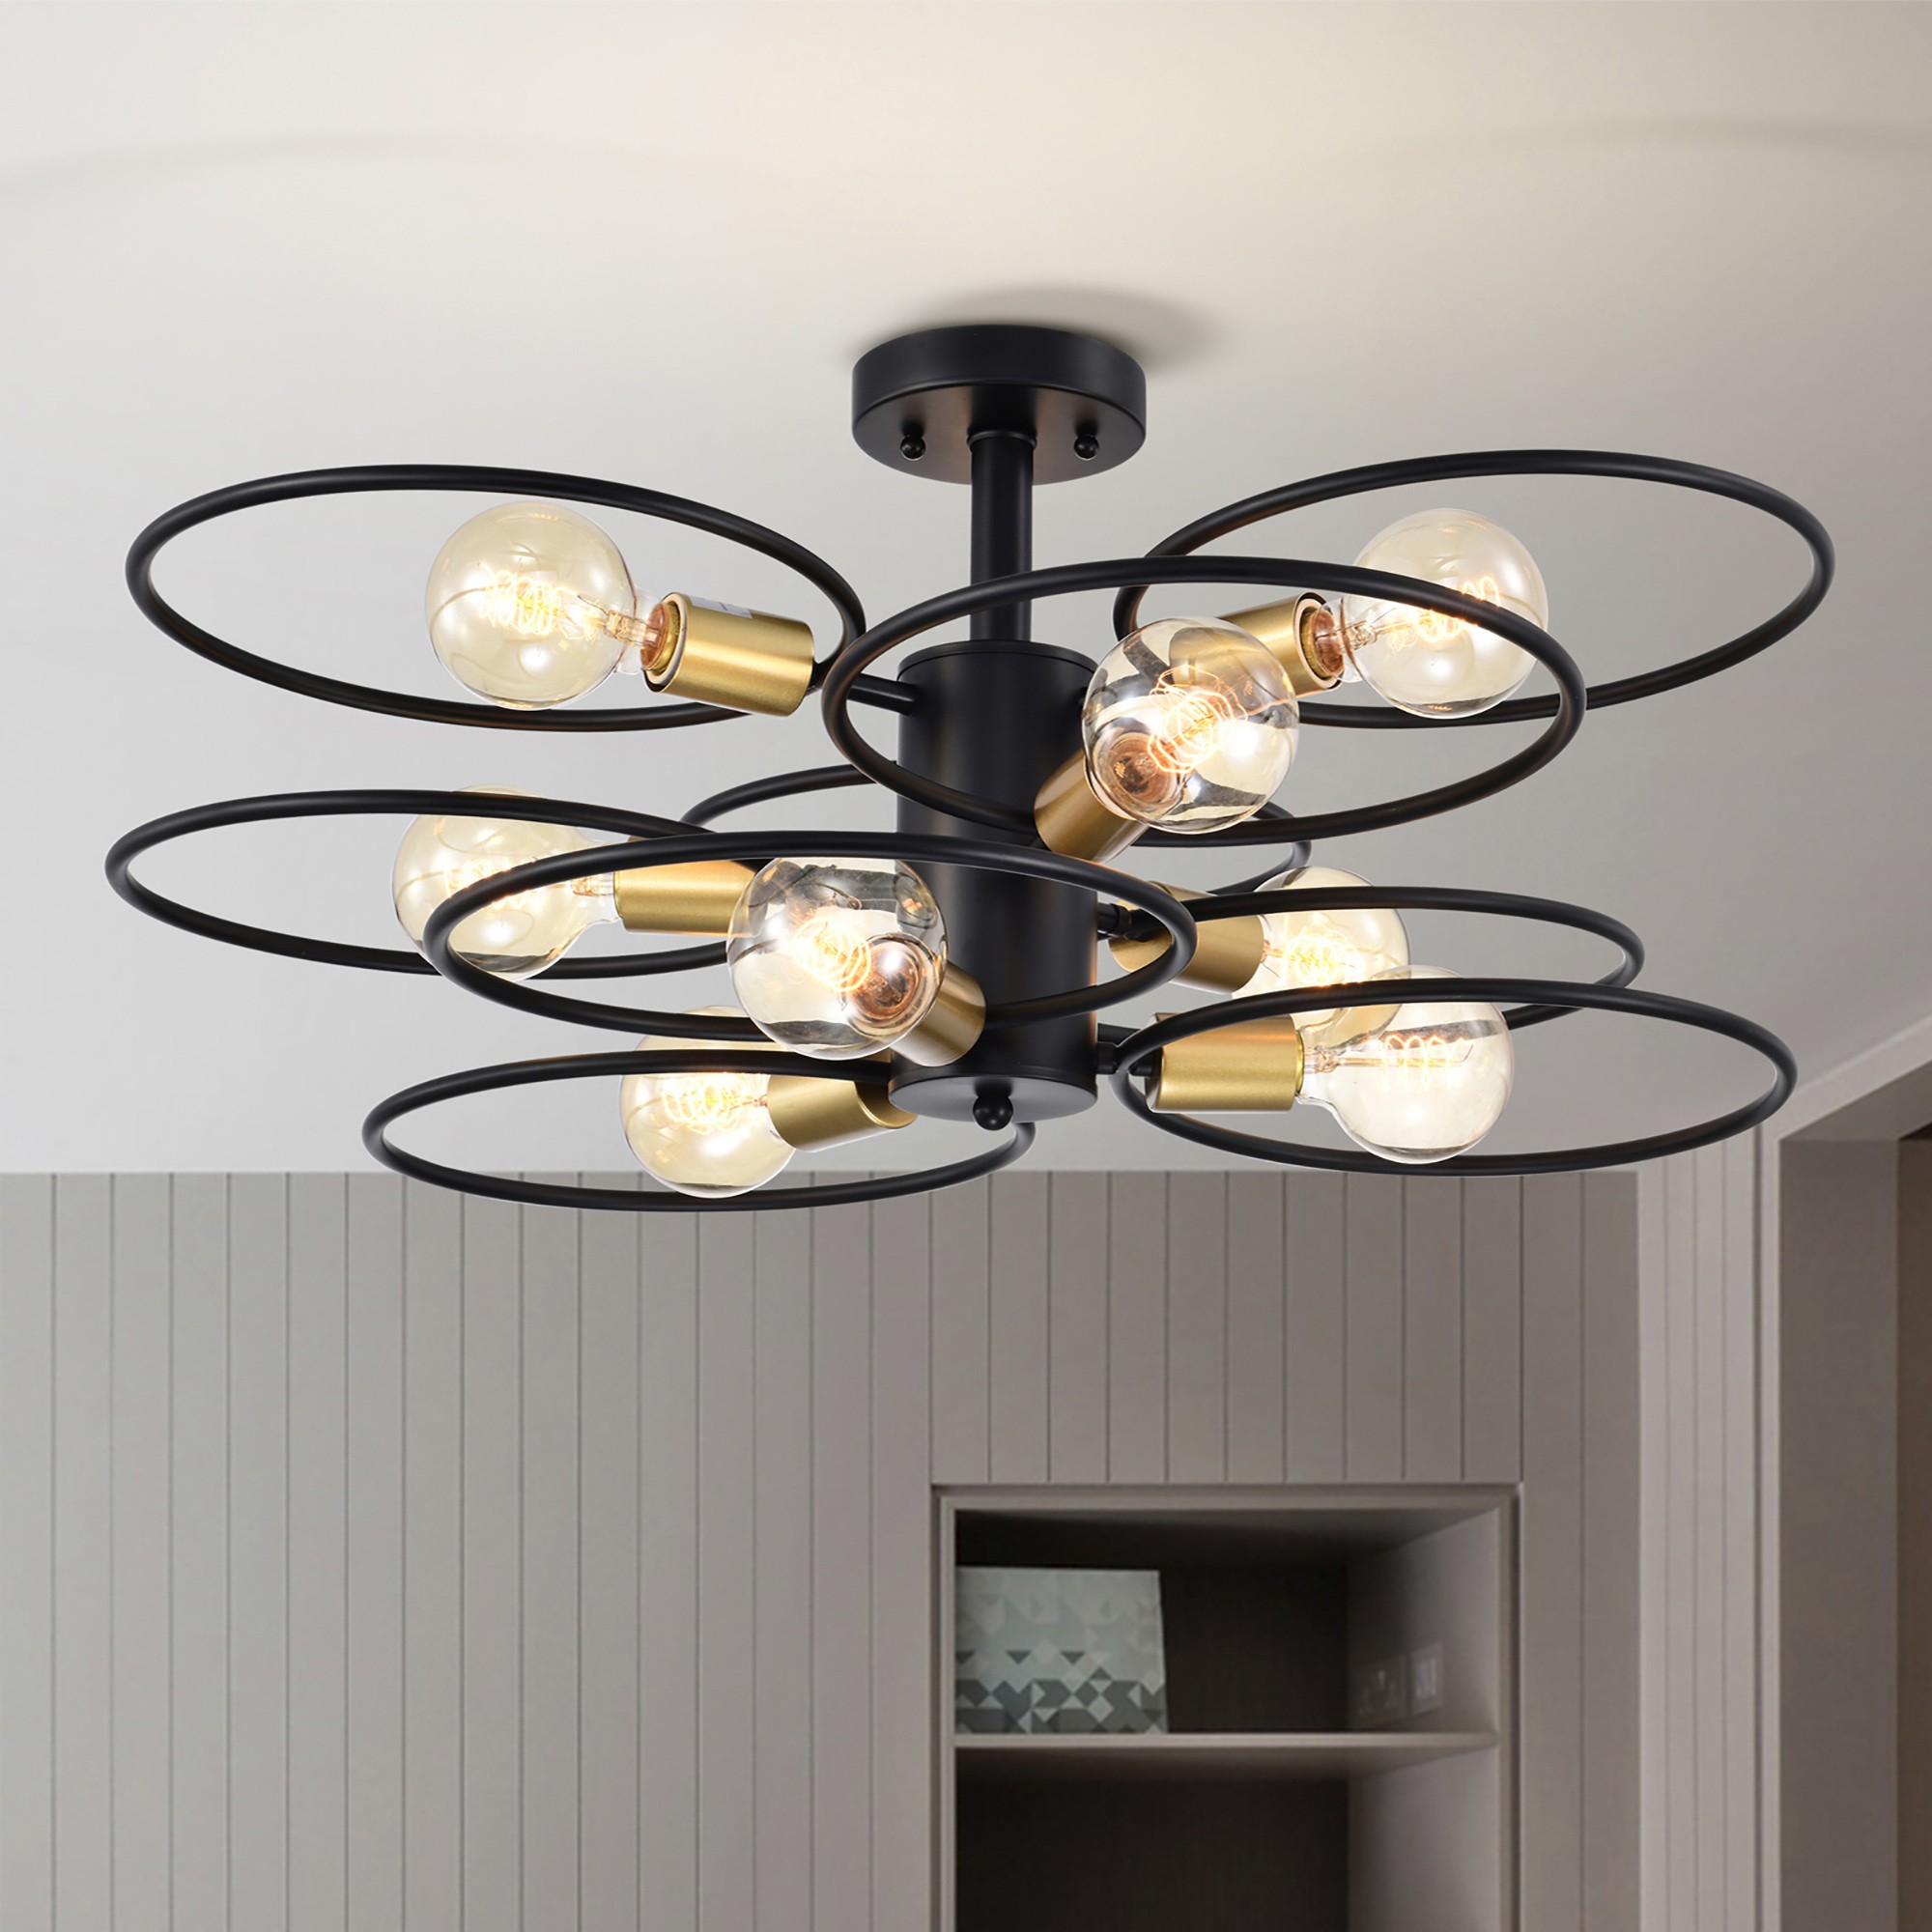 Camilla 28 in. 9-Light Indoor Matte Black Finish Semi-Flush Mount Ceiling Light with Light Kit and Remote